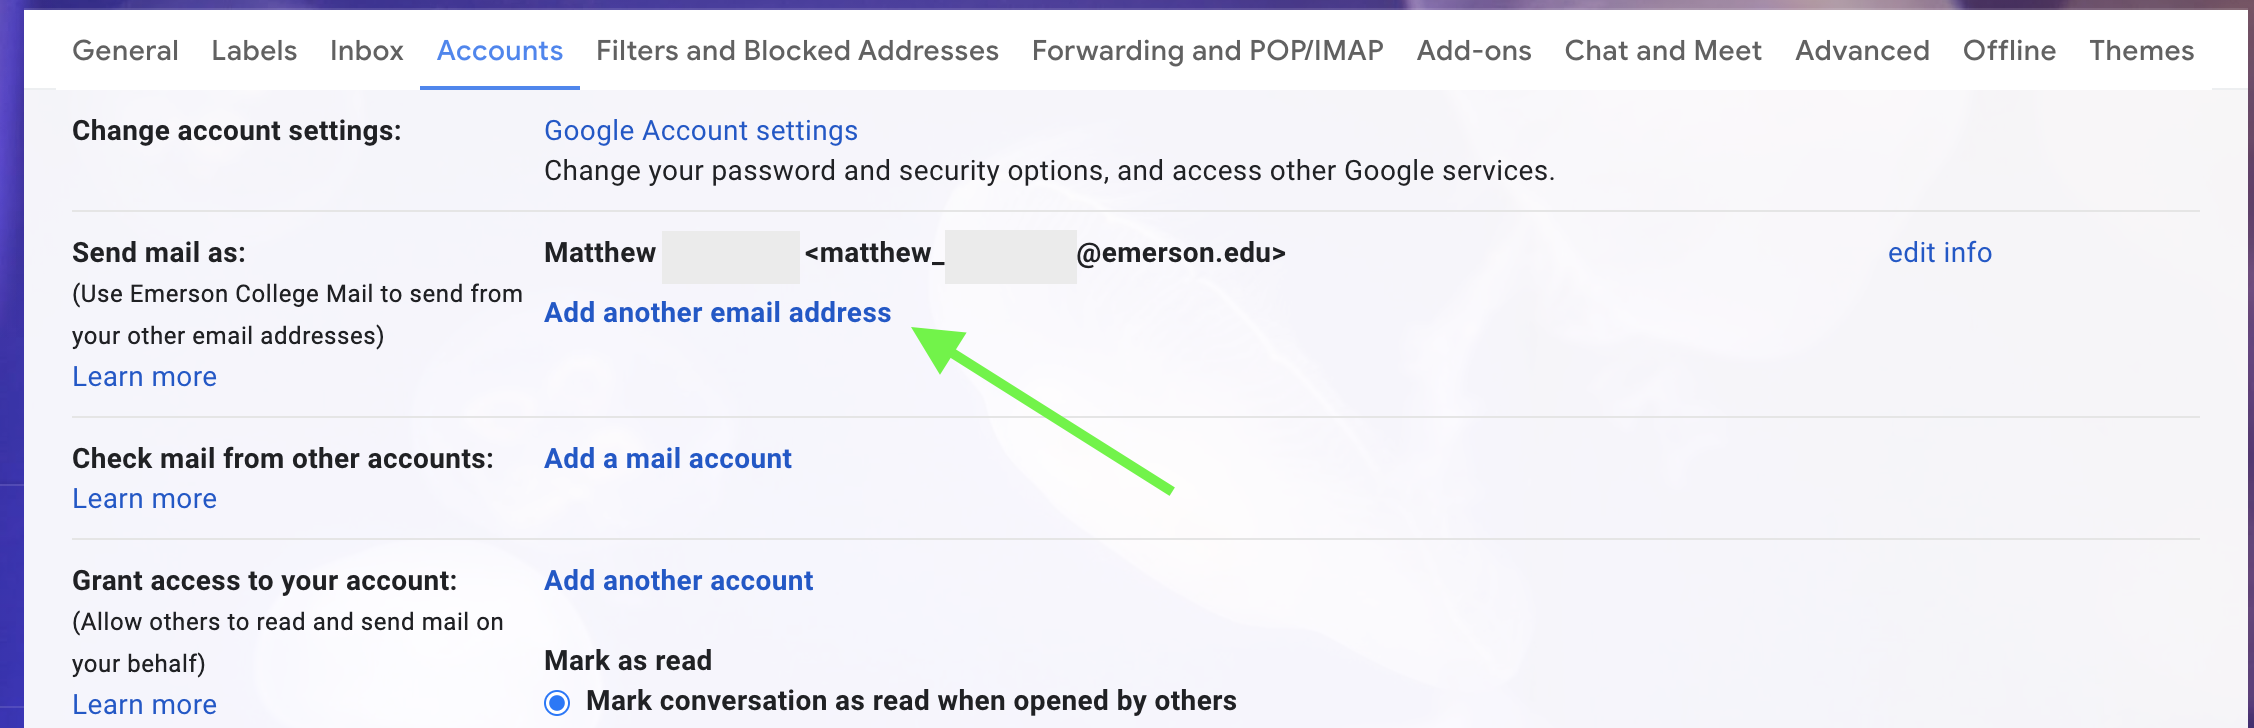 Image of Gmail account settings.